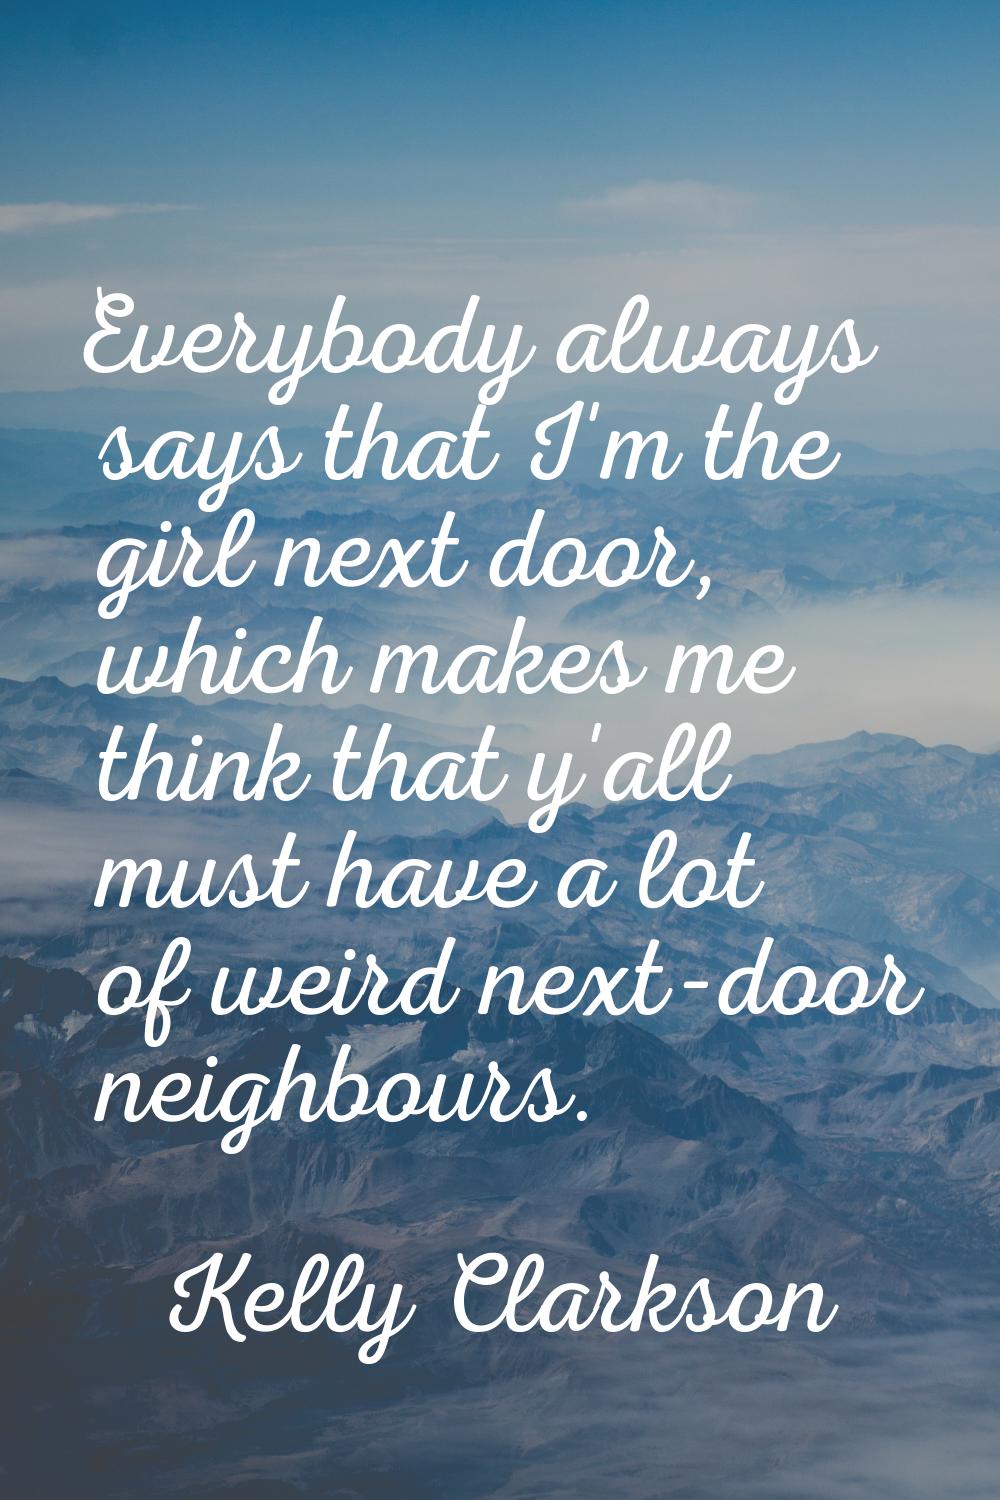 Everybody always says that I'm the girl next door, which makes me think that y'all must have a lot 